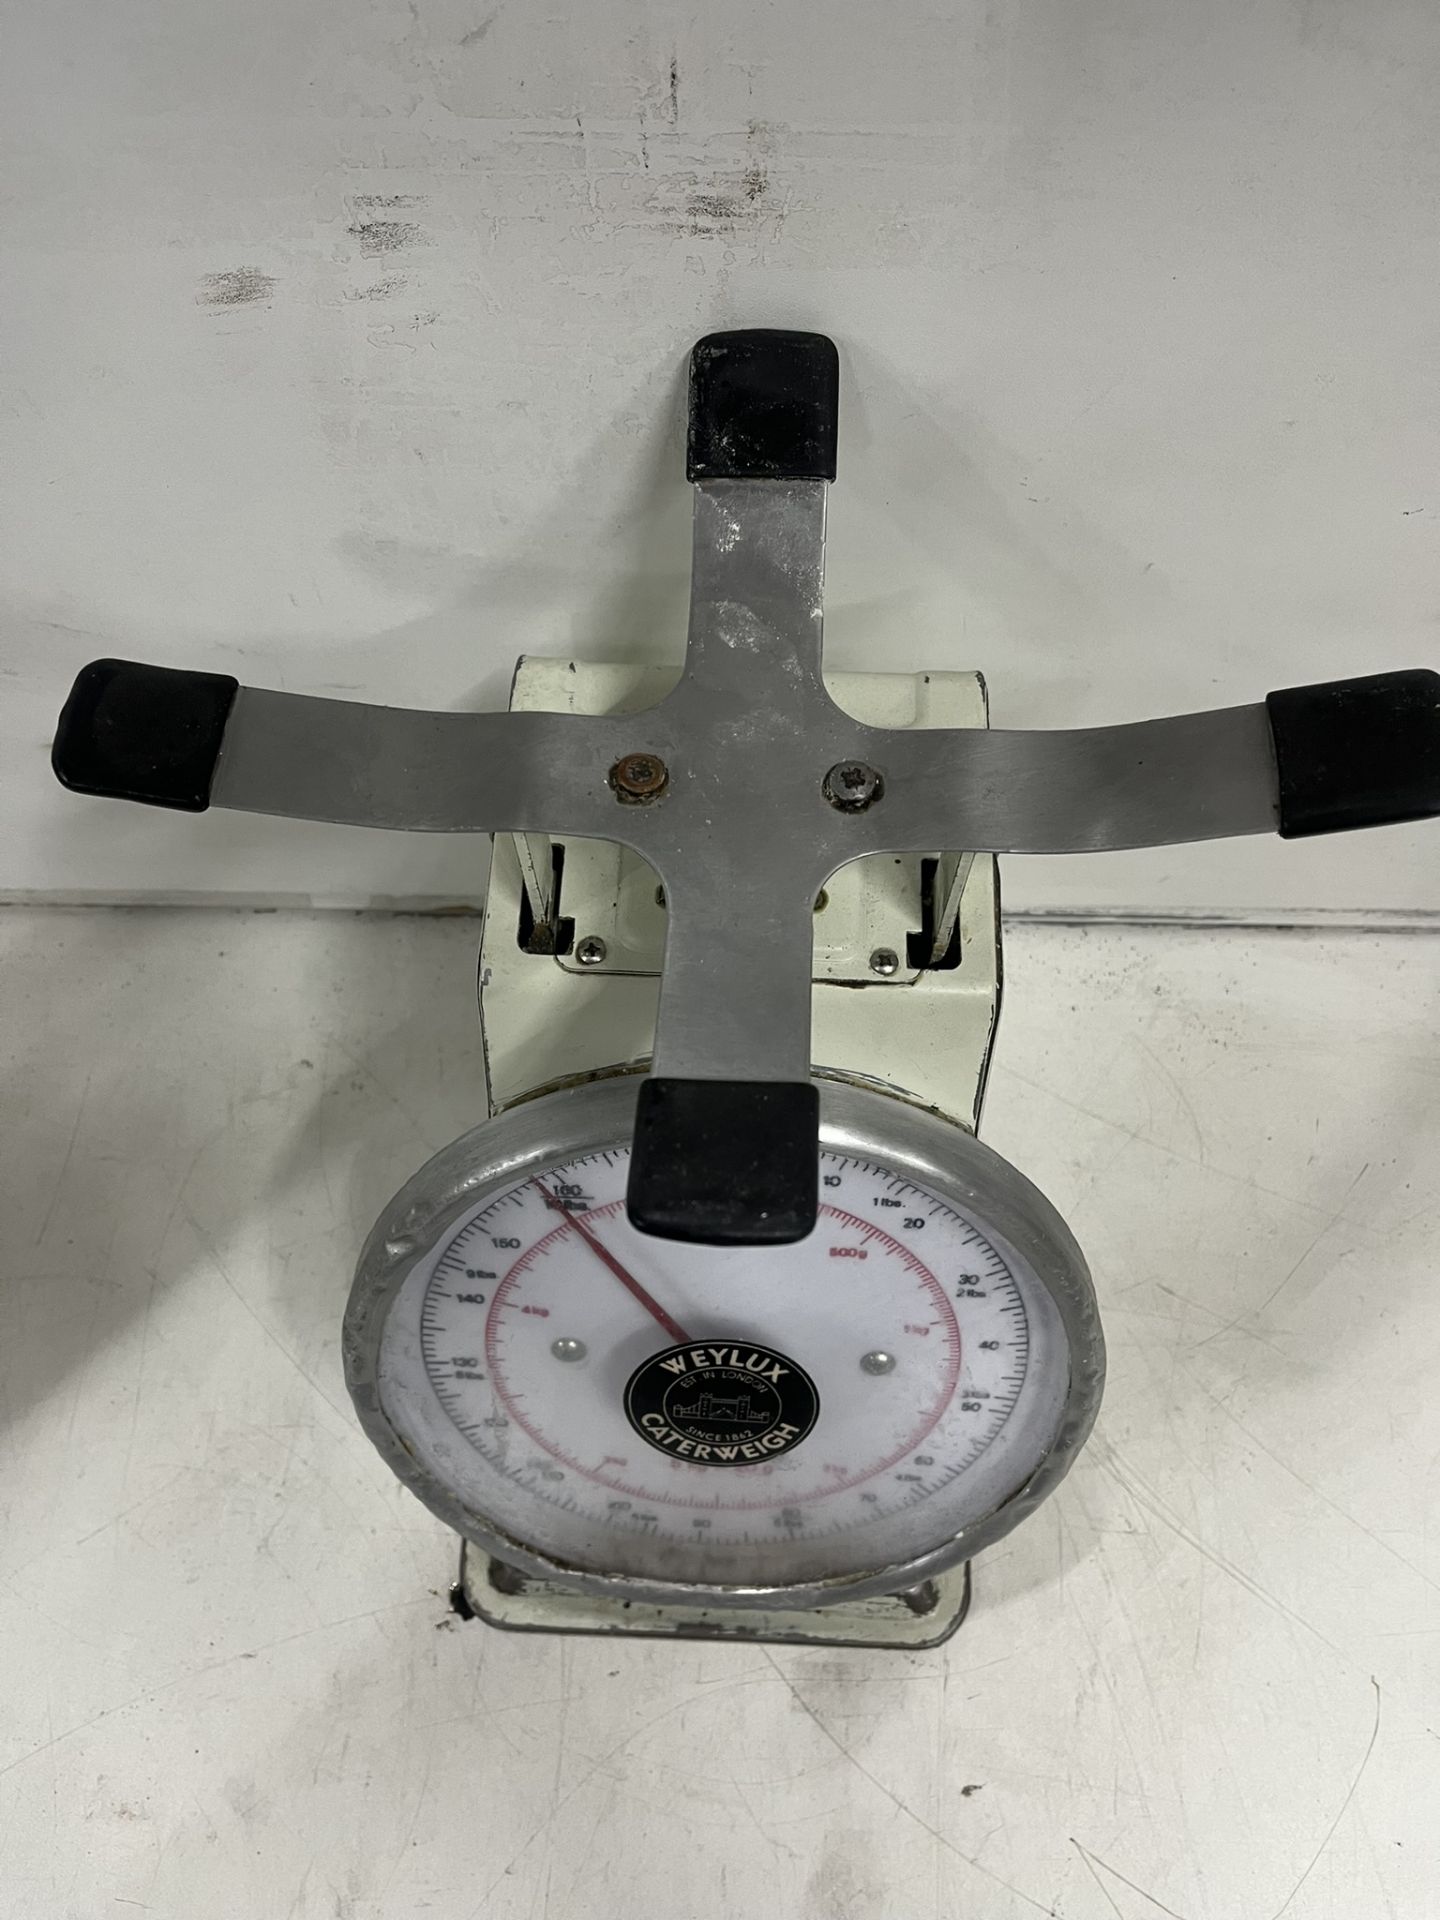 Weylux Caterweight Weighing Scales - Image 2 of 4